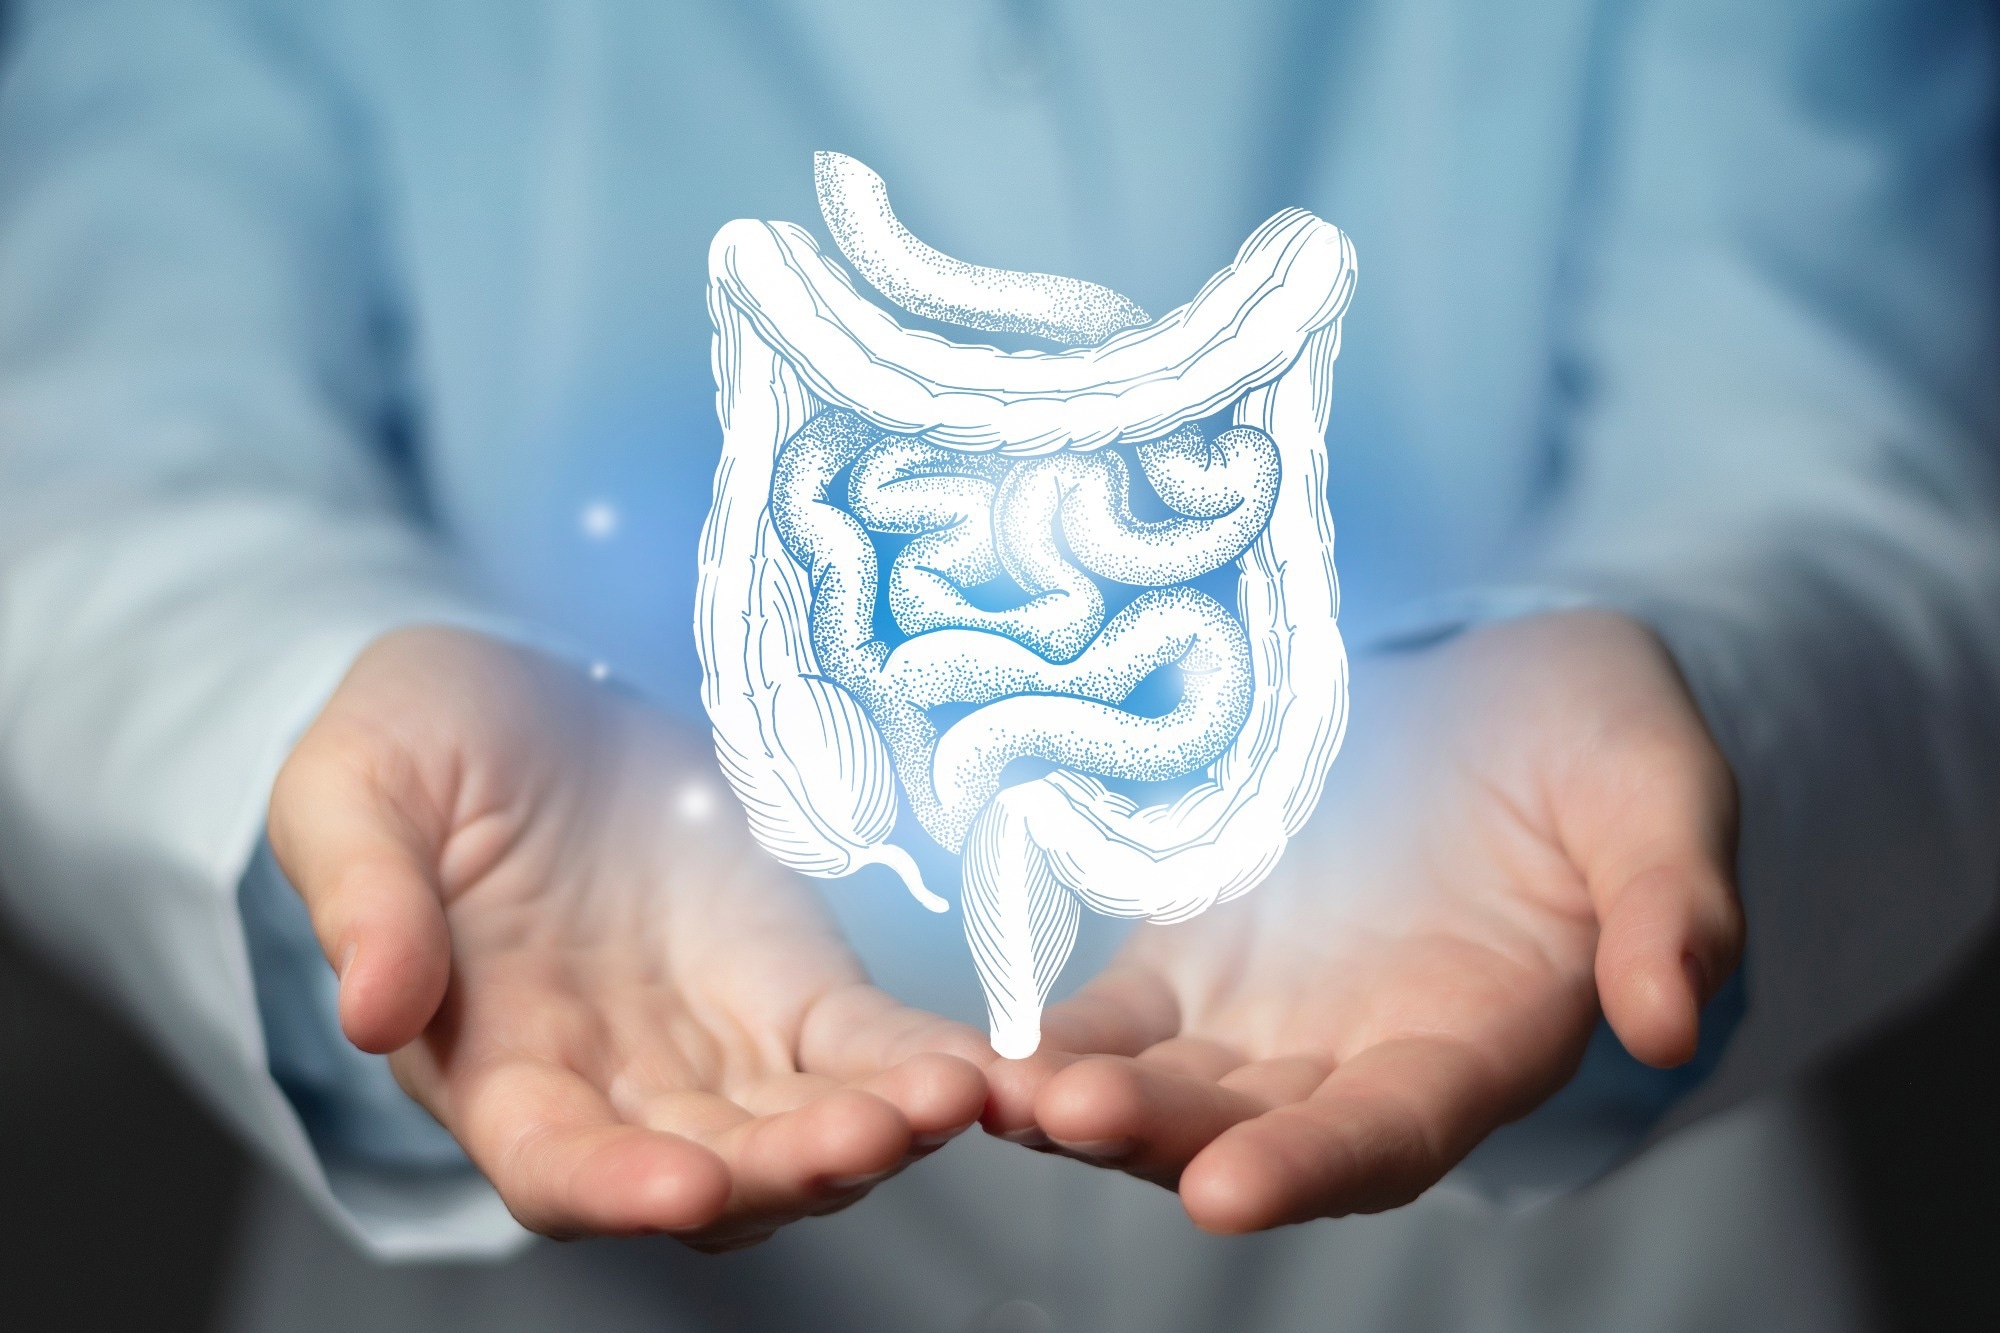 Study: Colorectal Cancer and Precursor Lesion Prevalence in Adults Younger Than 50 Years Without Symptoms. Image Credit: mi_viri / Shutterstock